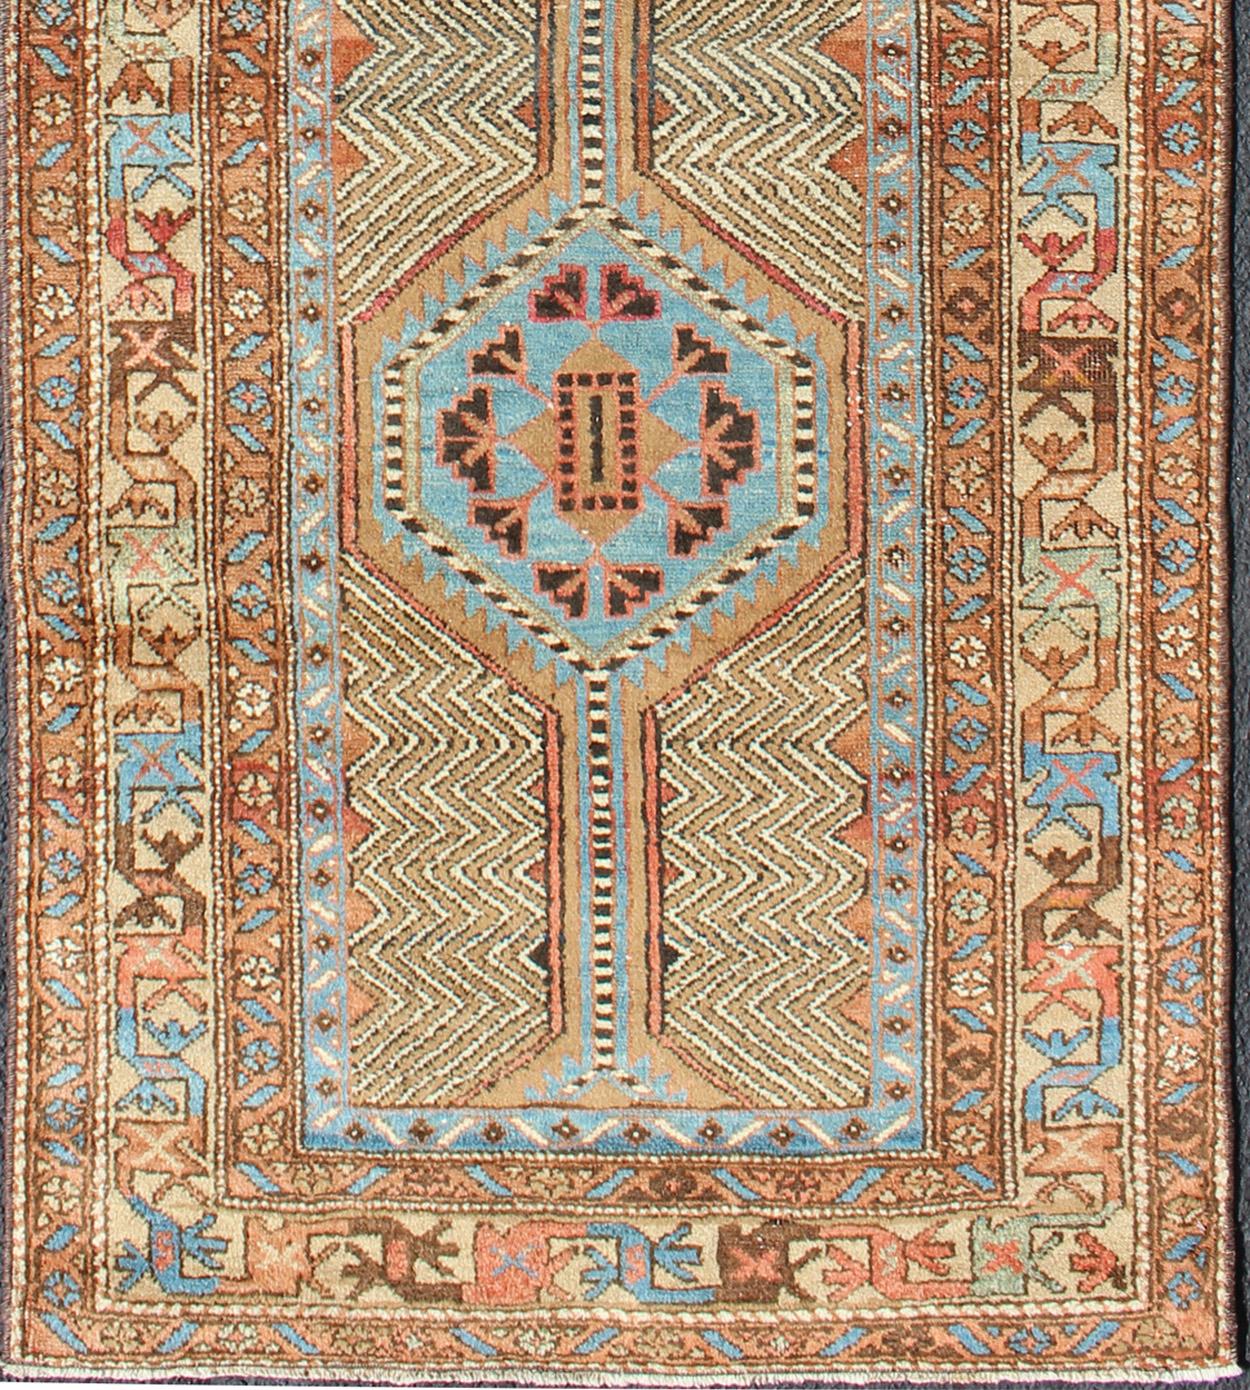 Geometric design Serab antique runner from Persia in multicolored Tones, rug ema-7536, country of origin / type: Iran / Serab, circa 1910.

This handwoven, antique Persian Serab rug features a central field imbued with an all-over zig-zag design and